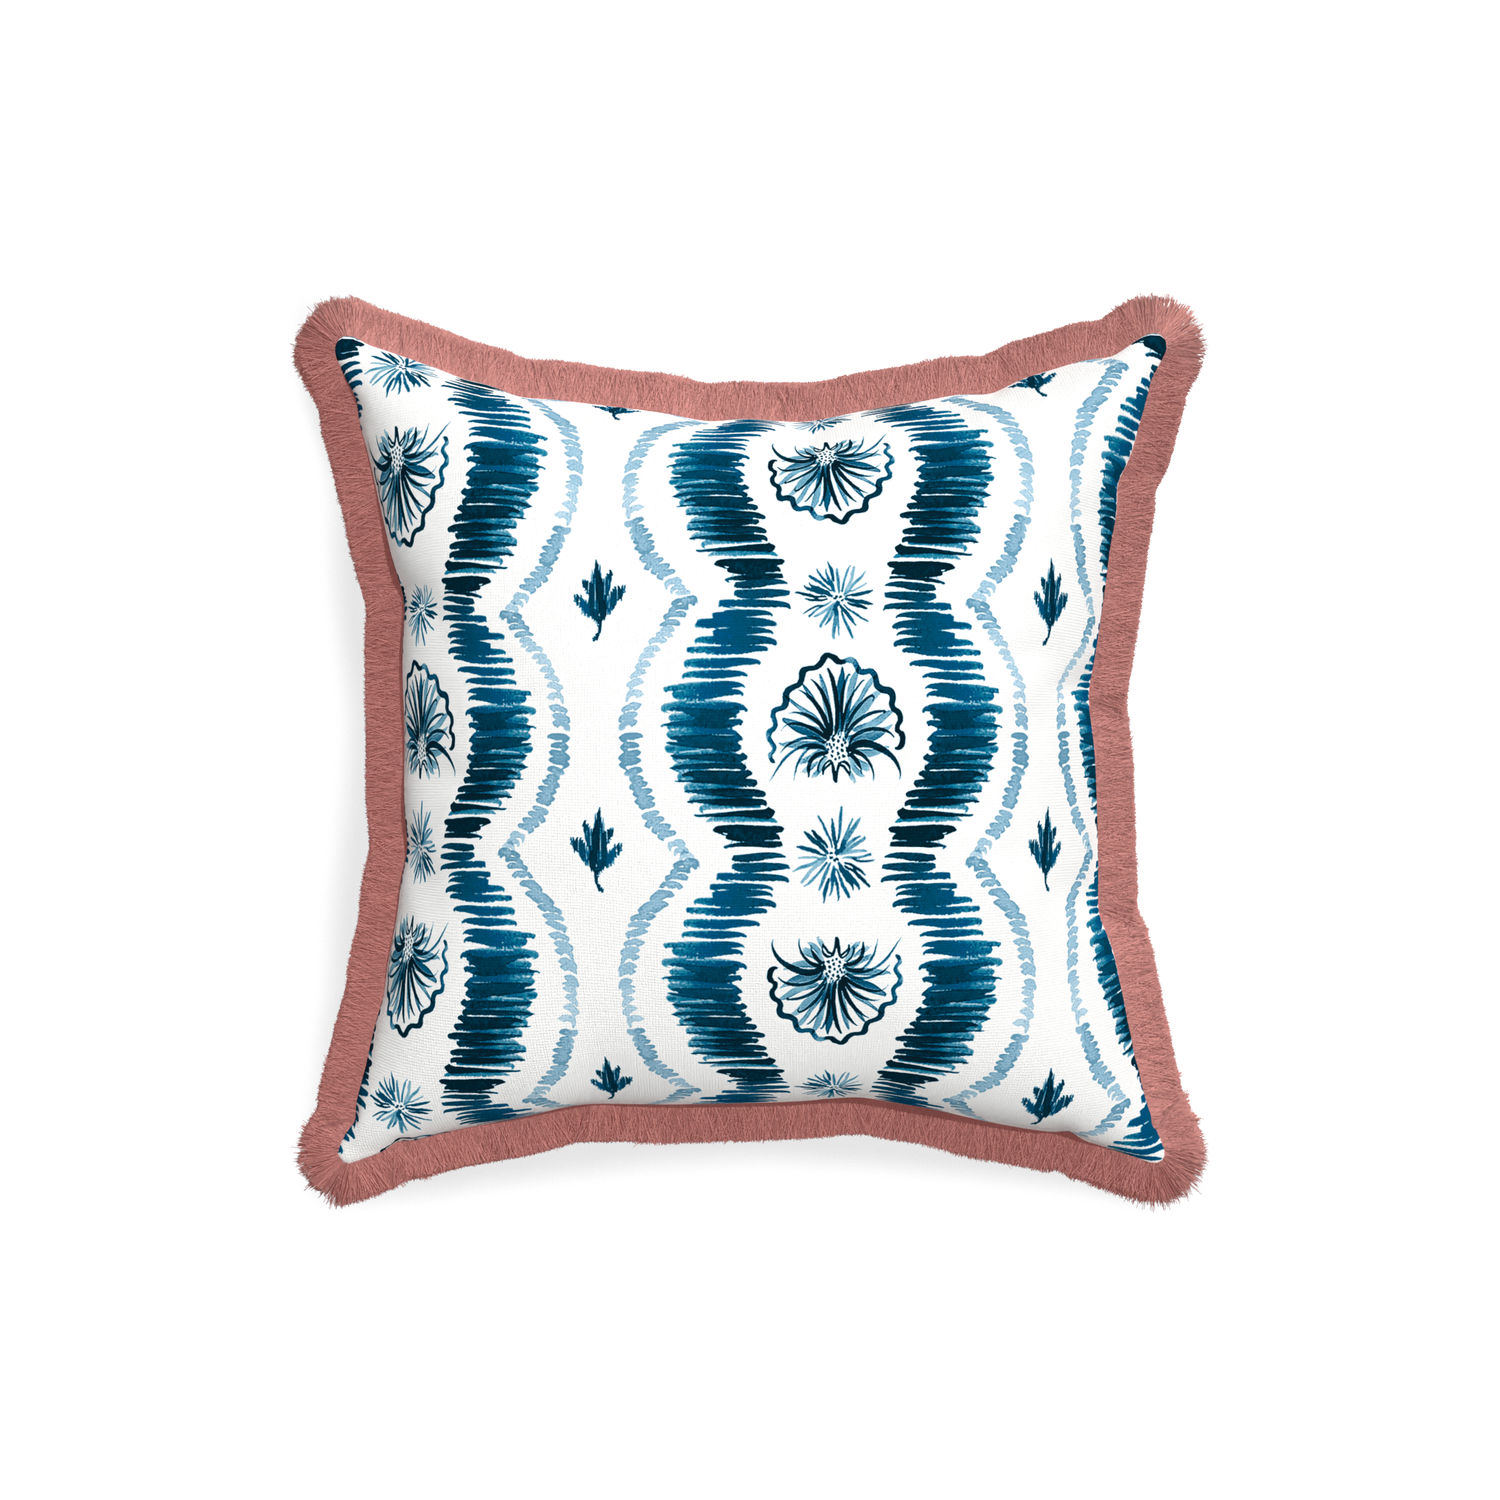 18-square alice custom blue ikatpillow with d fringe on white background